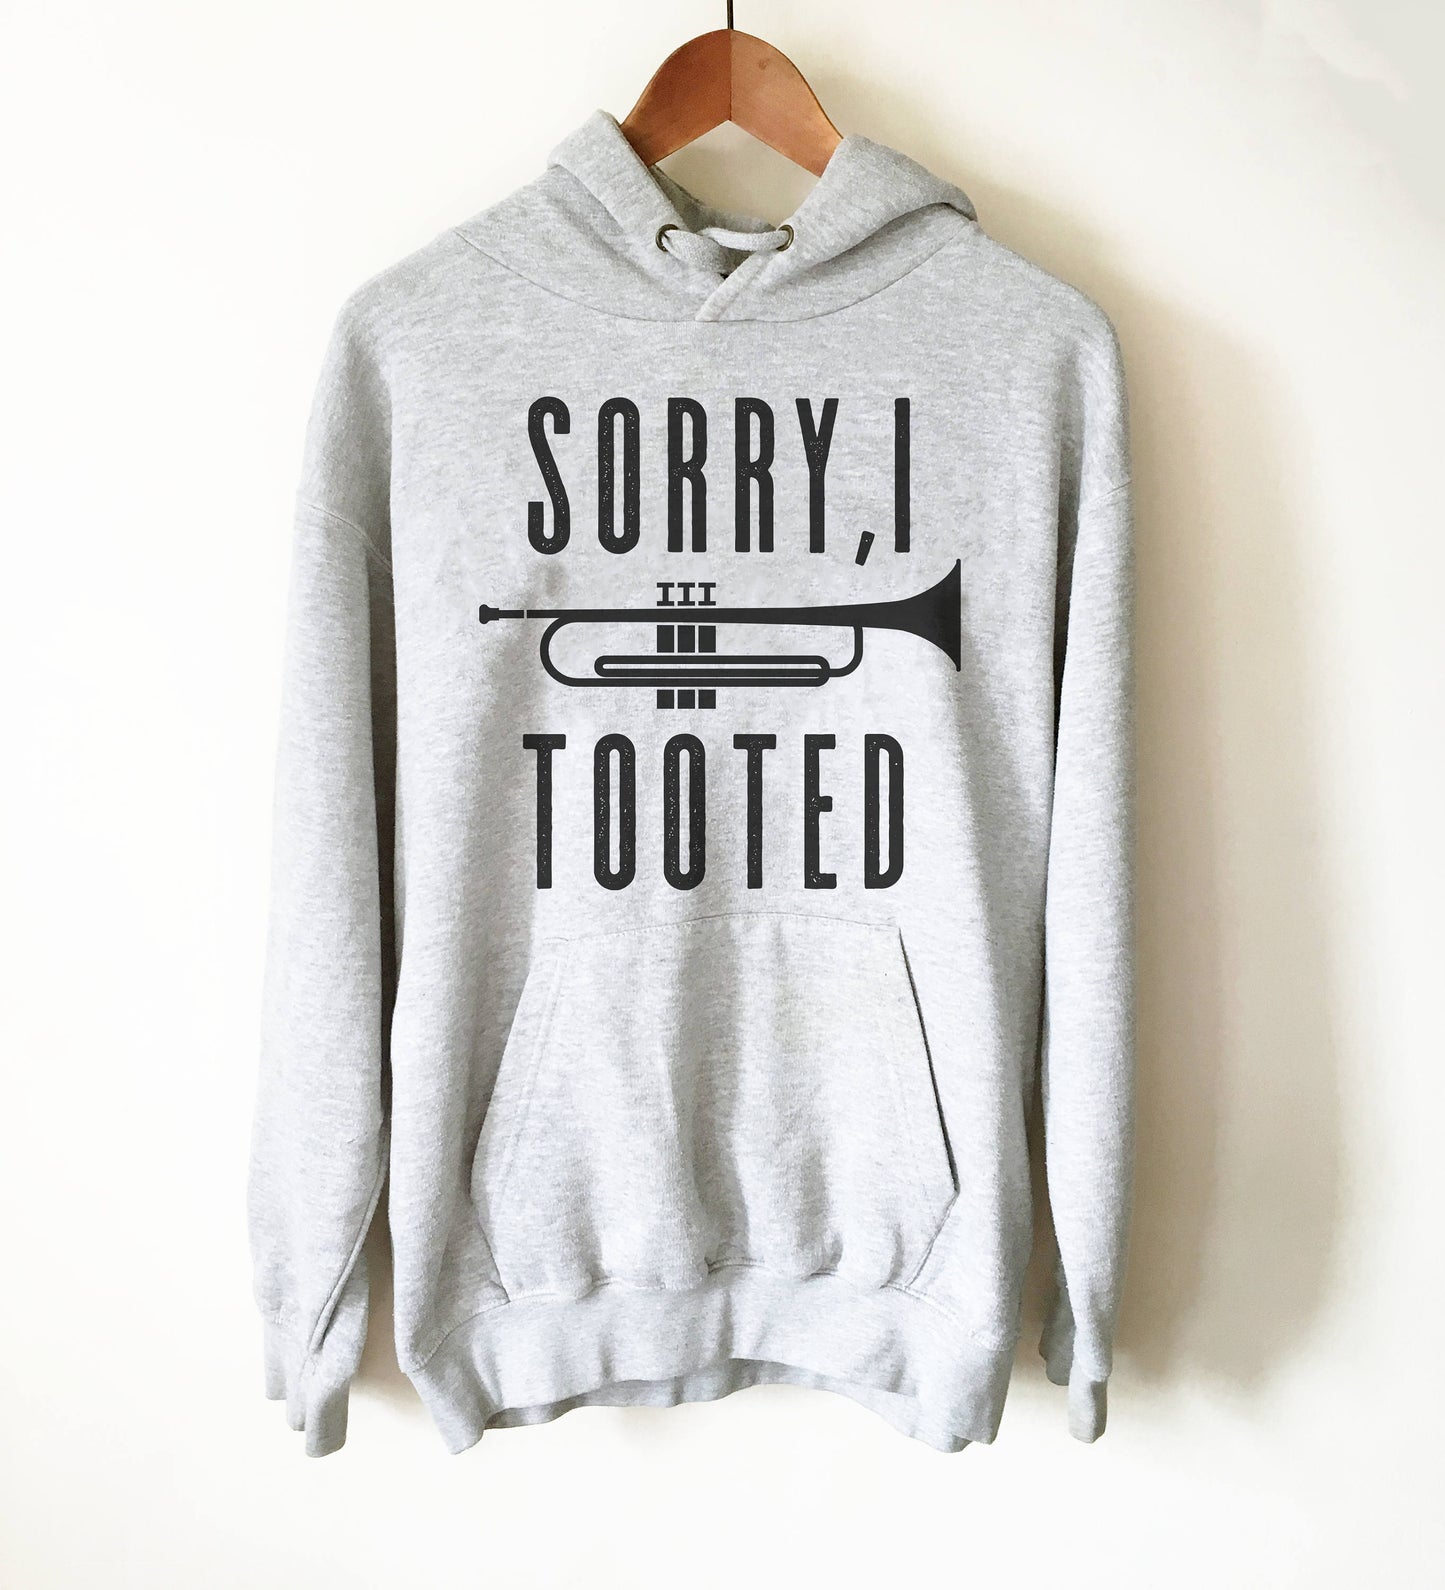 Sorry I Tooted Hoodie - Trumpet hoodie, Trumpet shirt, Trumpet gift, Trumpet player, Musician gift, Marching band shirt, Band shirt